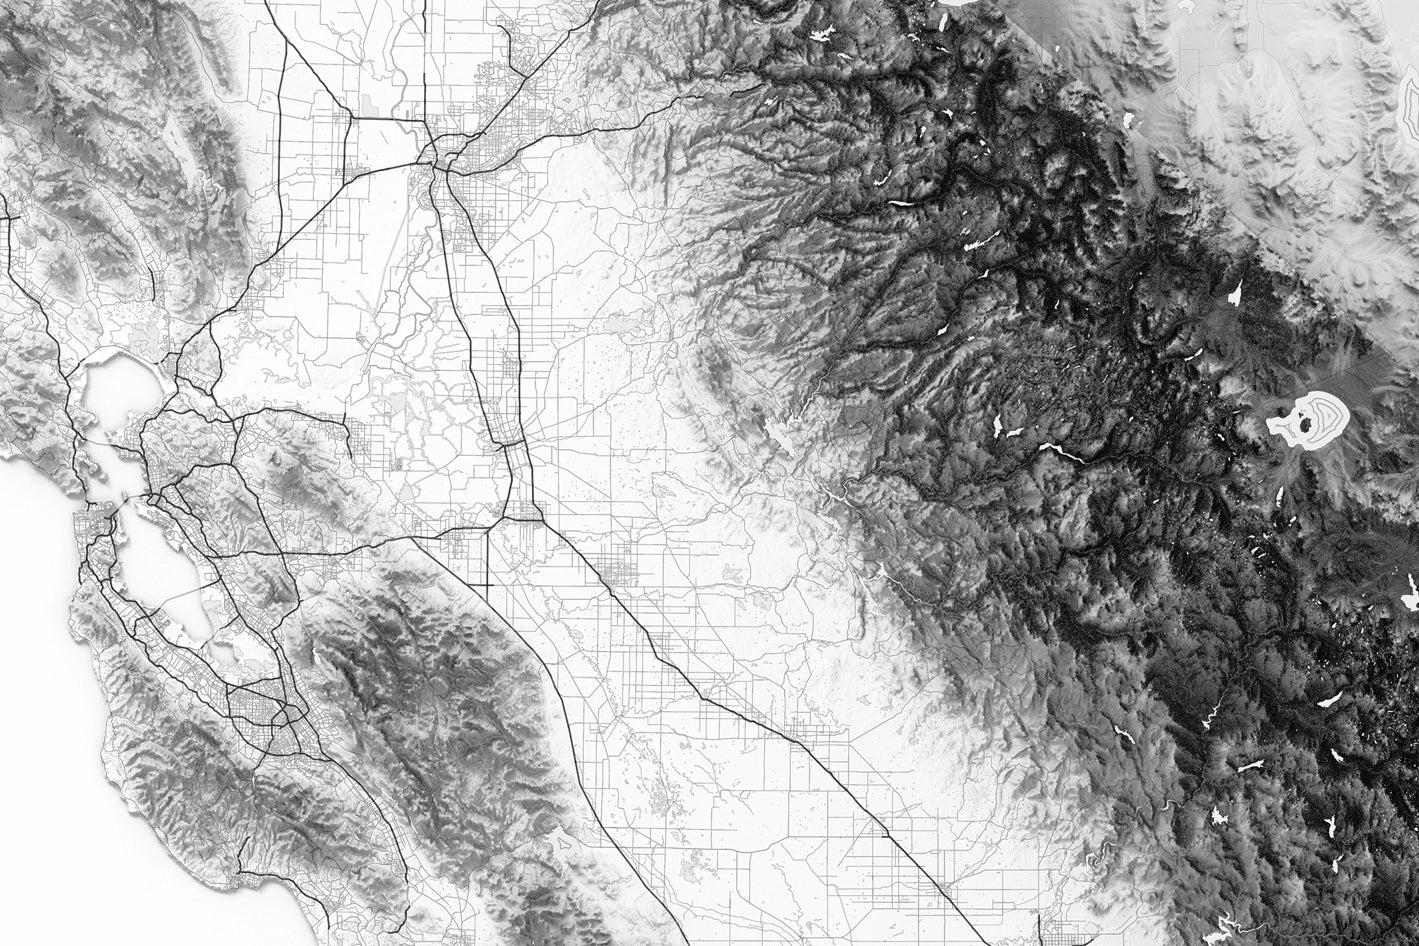 Detailed topographic relief and roads of california's central valley